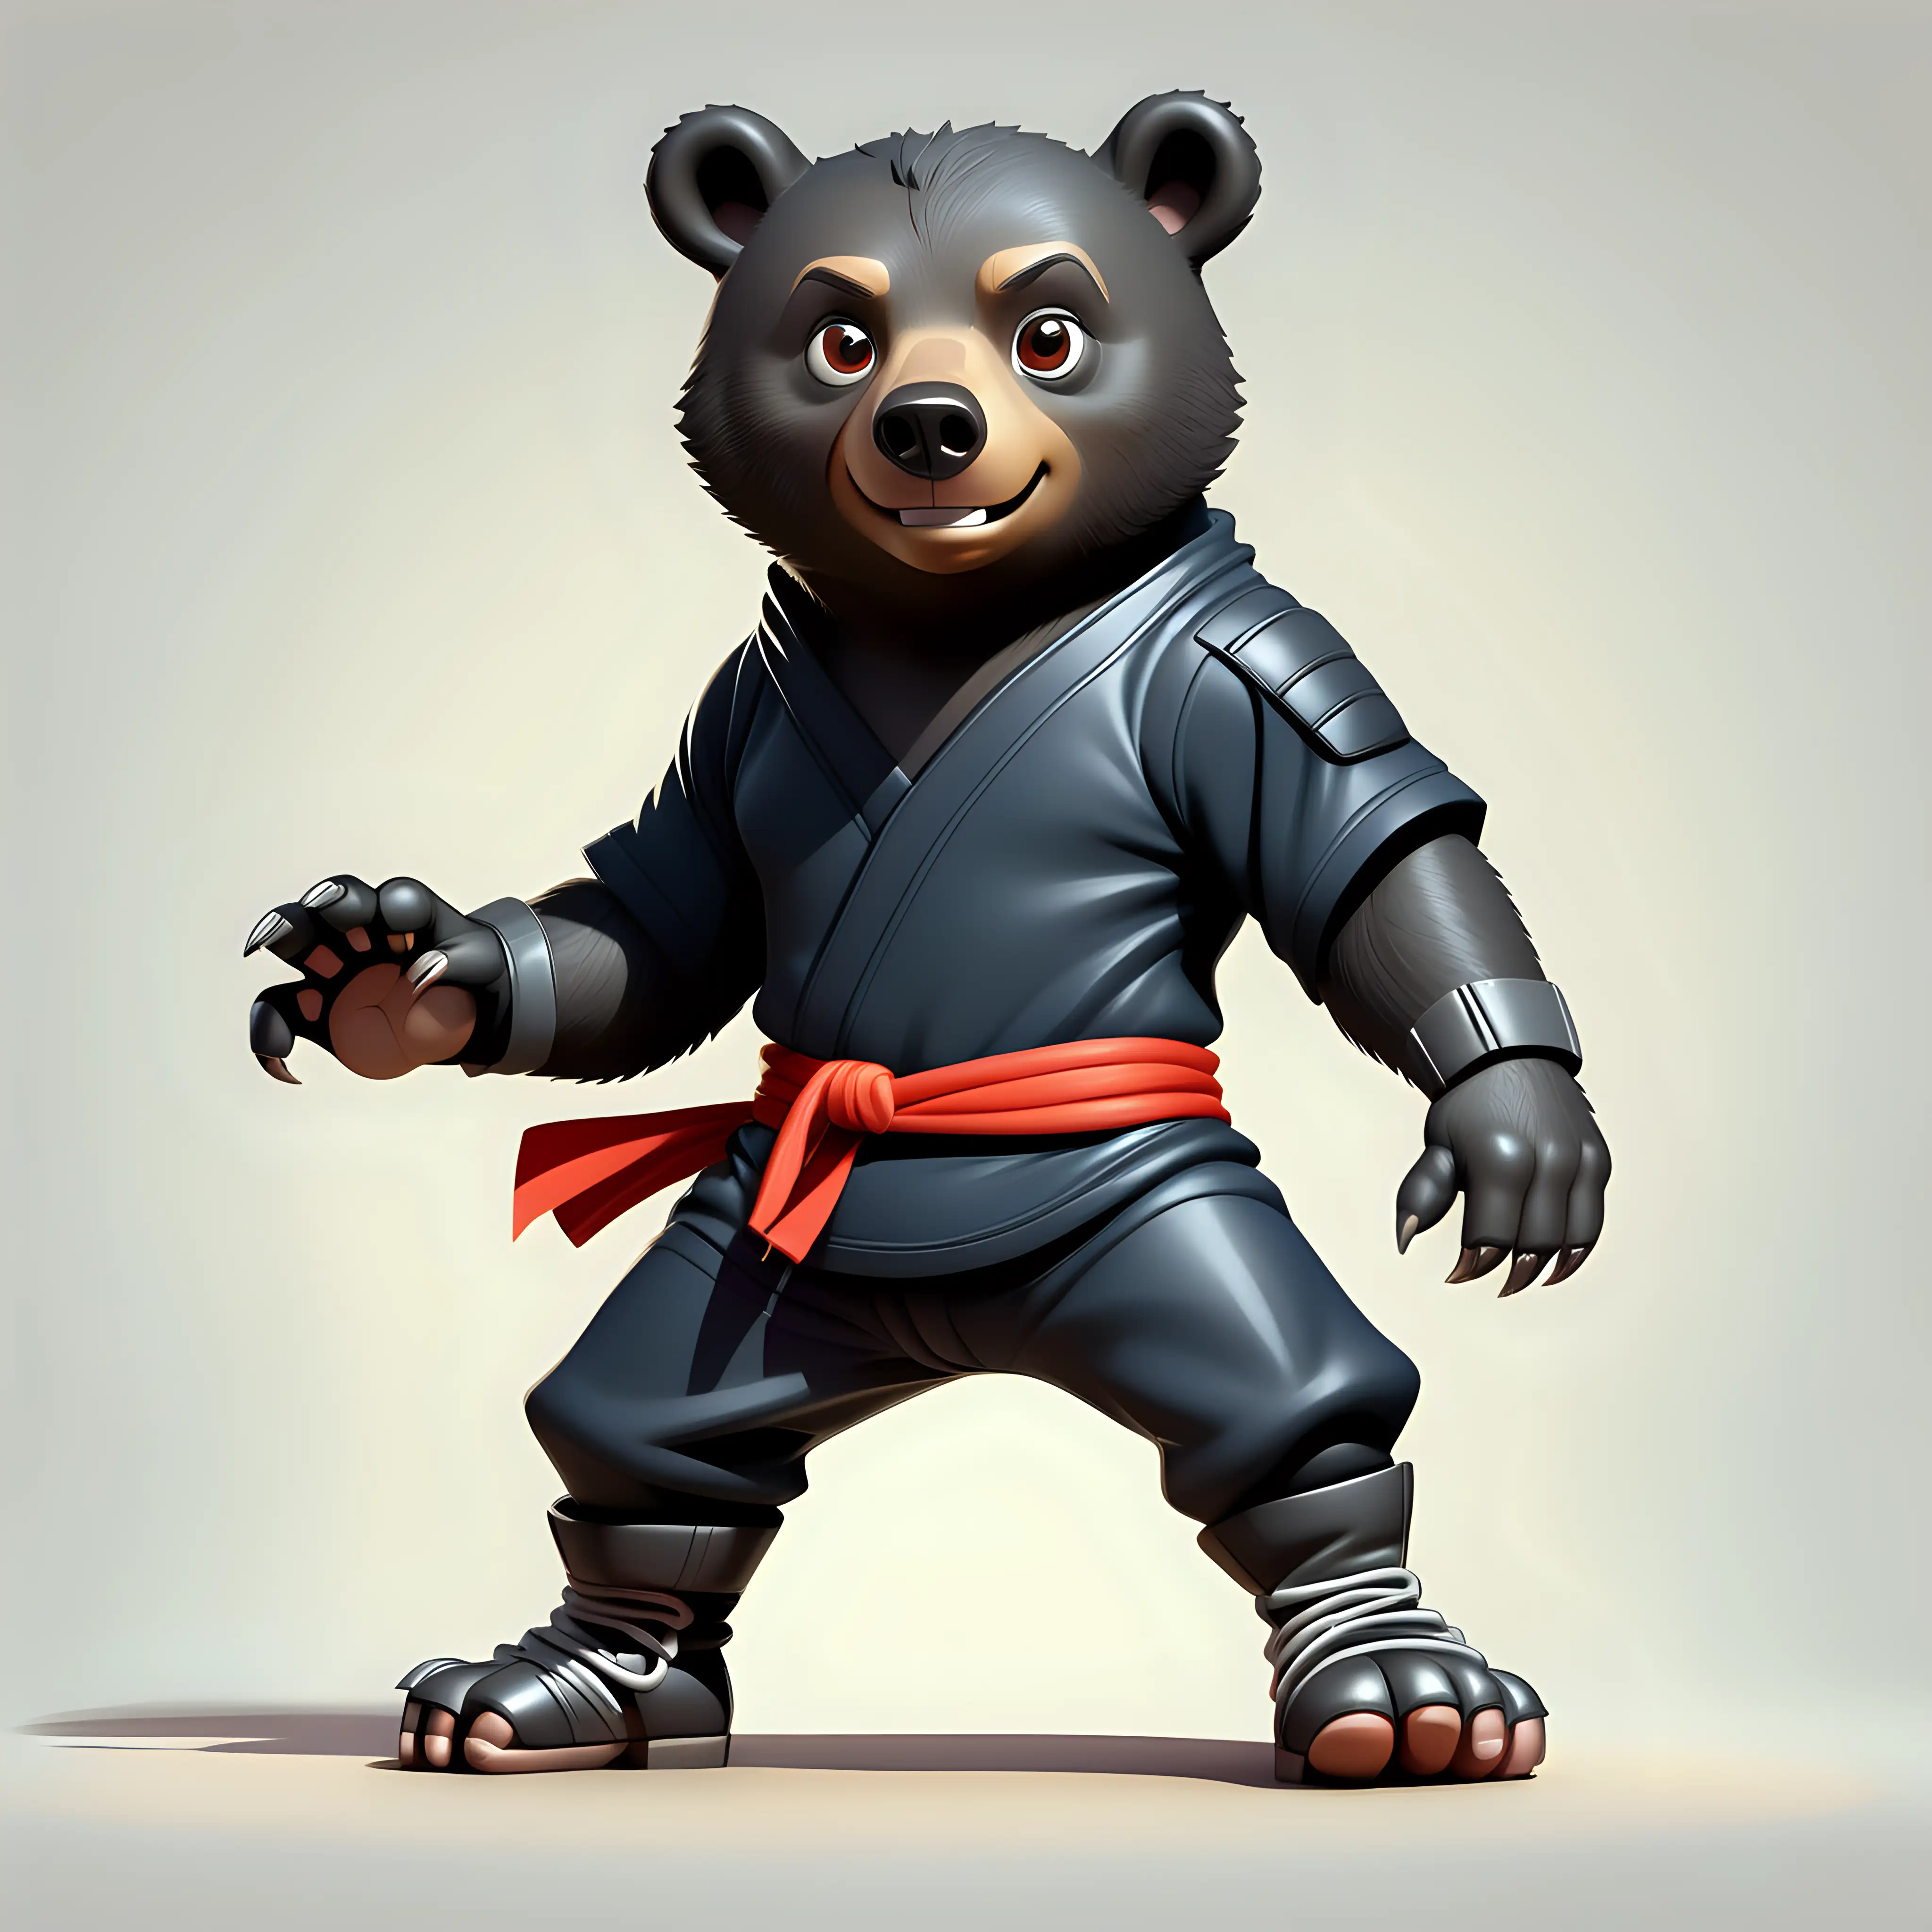 illustrate a black bear with two foot in cartoon style with ninja clothes with boots with clear background